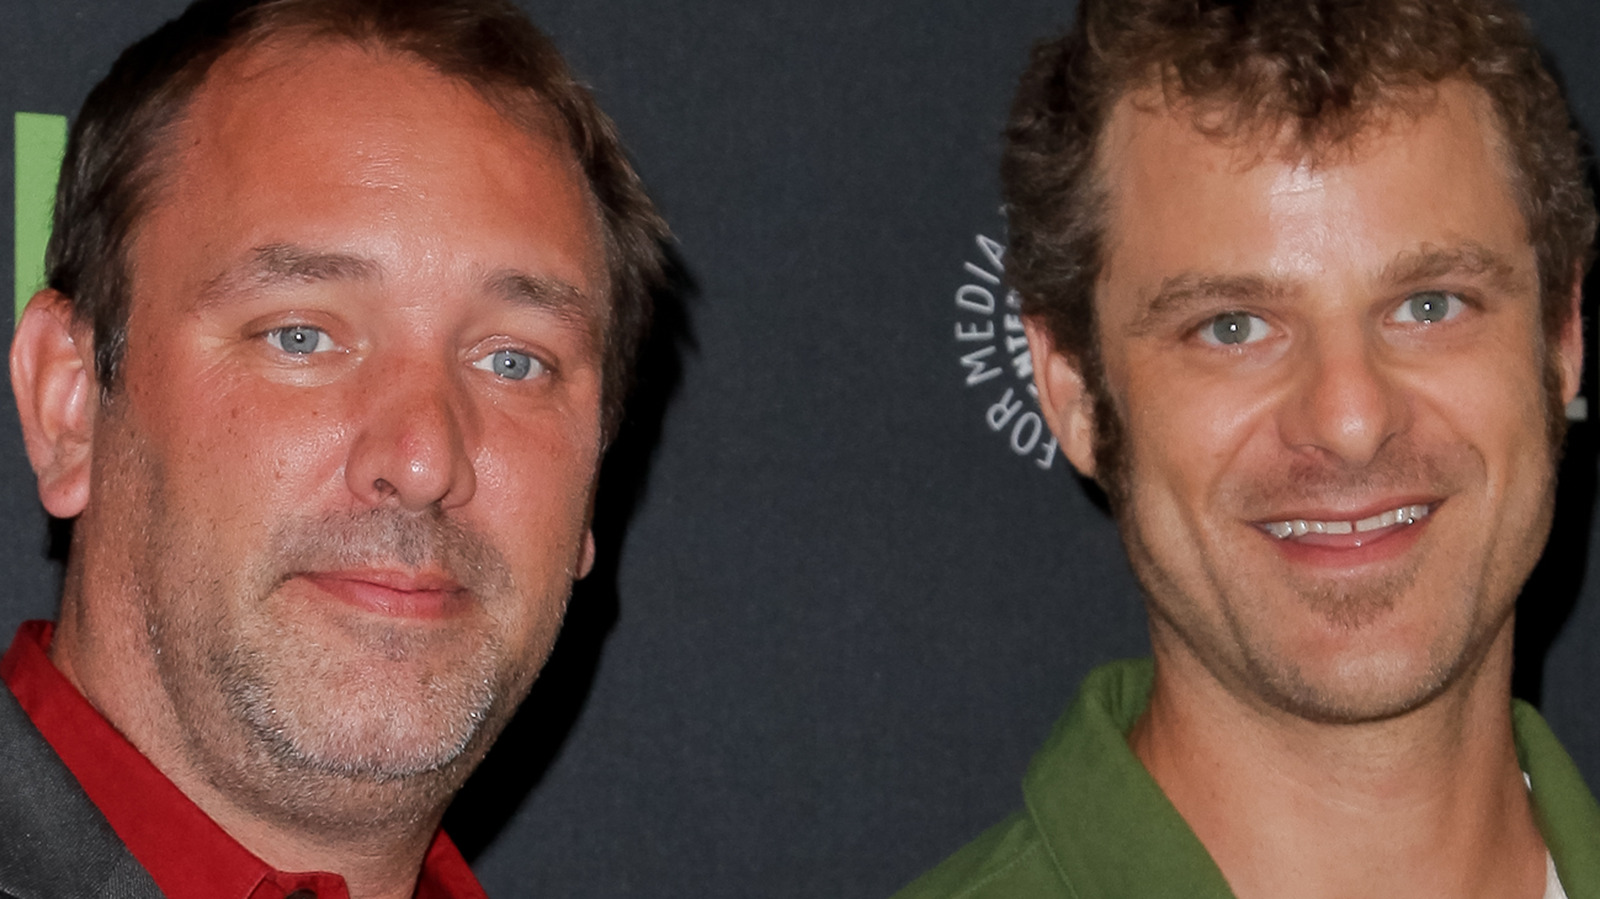 That Time South Park's Matt Stone And Trey Parker Got Sued Over The Lollipop King